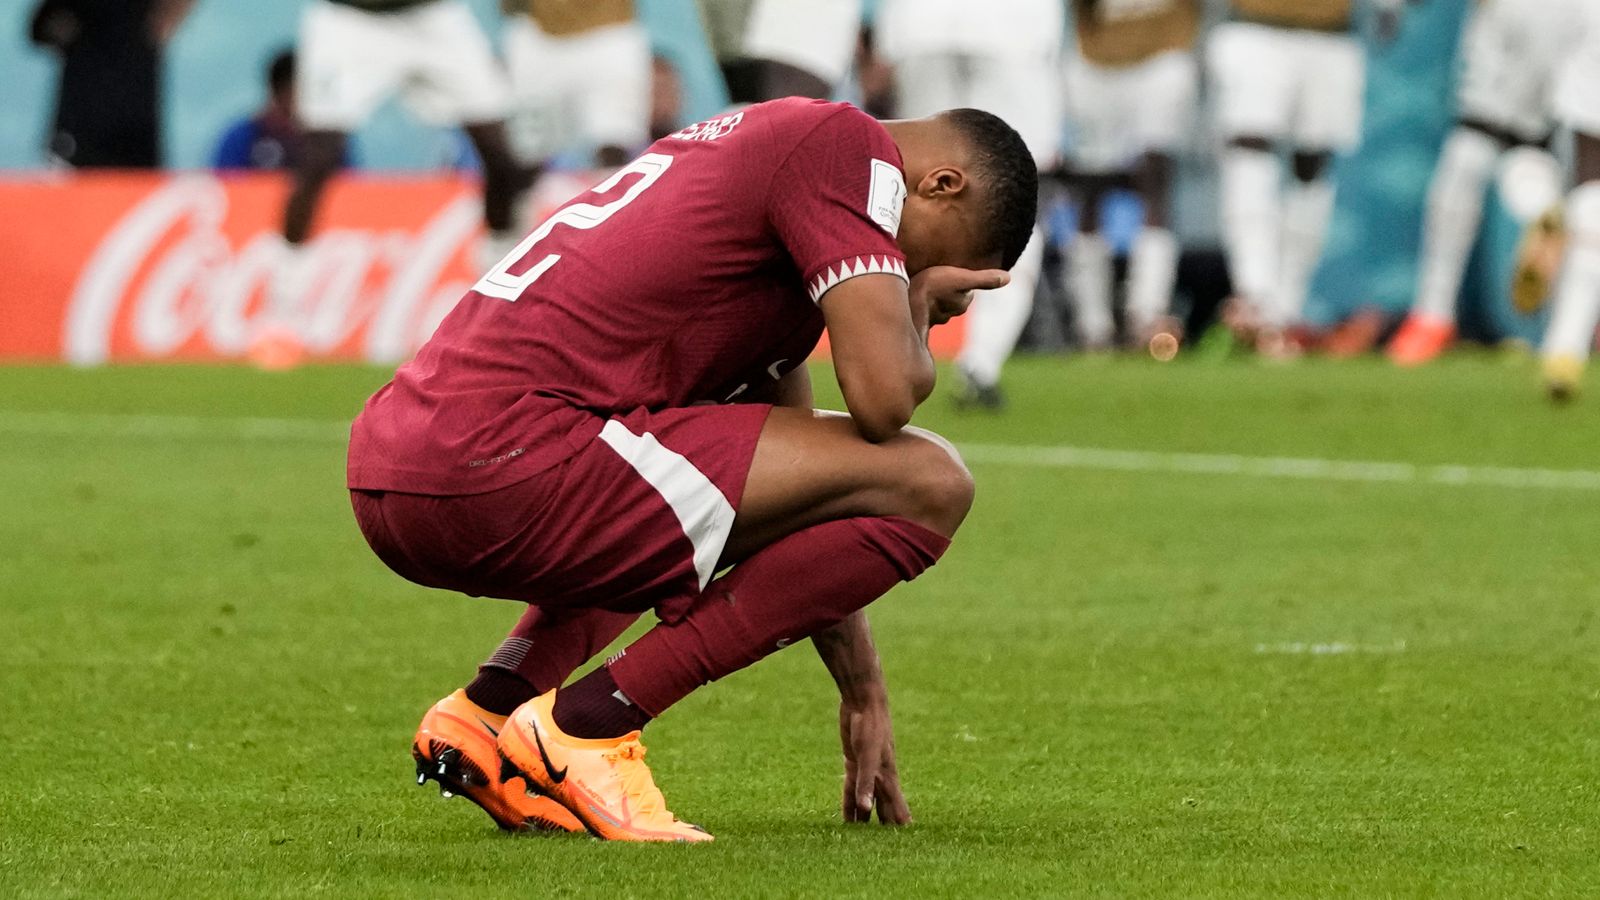 World Cup 2022: Qatar out of tournament - first-ever host nation to be eliminated after just two games